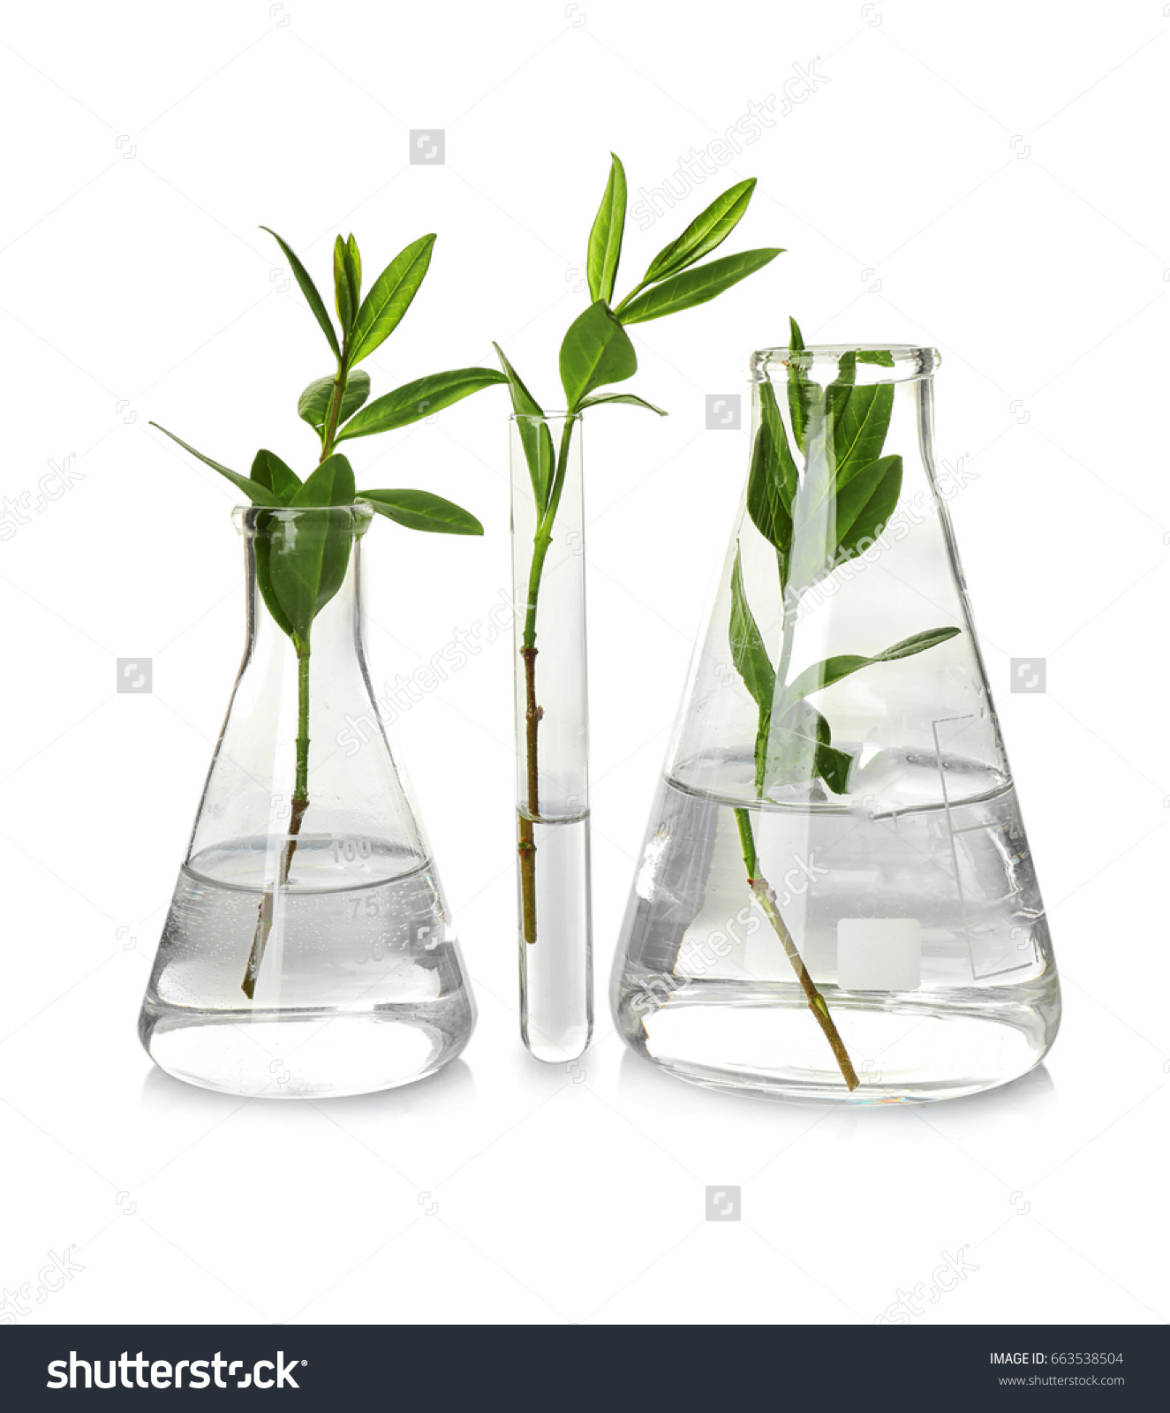 stock-photo-plants-in-glassware-isolated-on-white-663538504.jpg